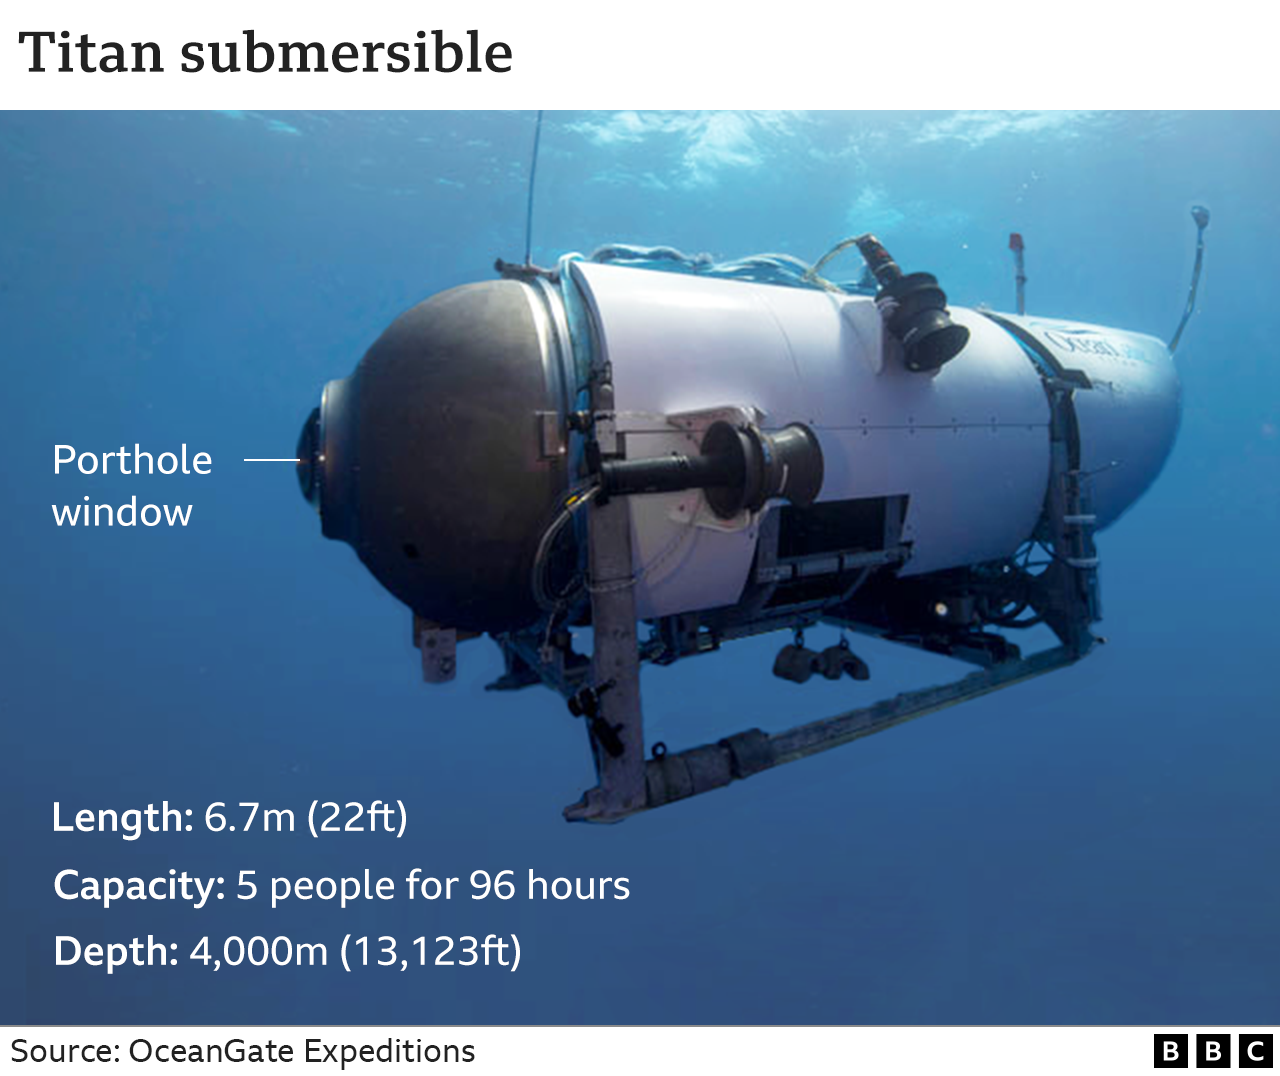 What it's like inside the Titanic-touring submersible that went missing  with 5 people on board